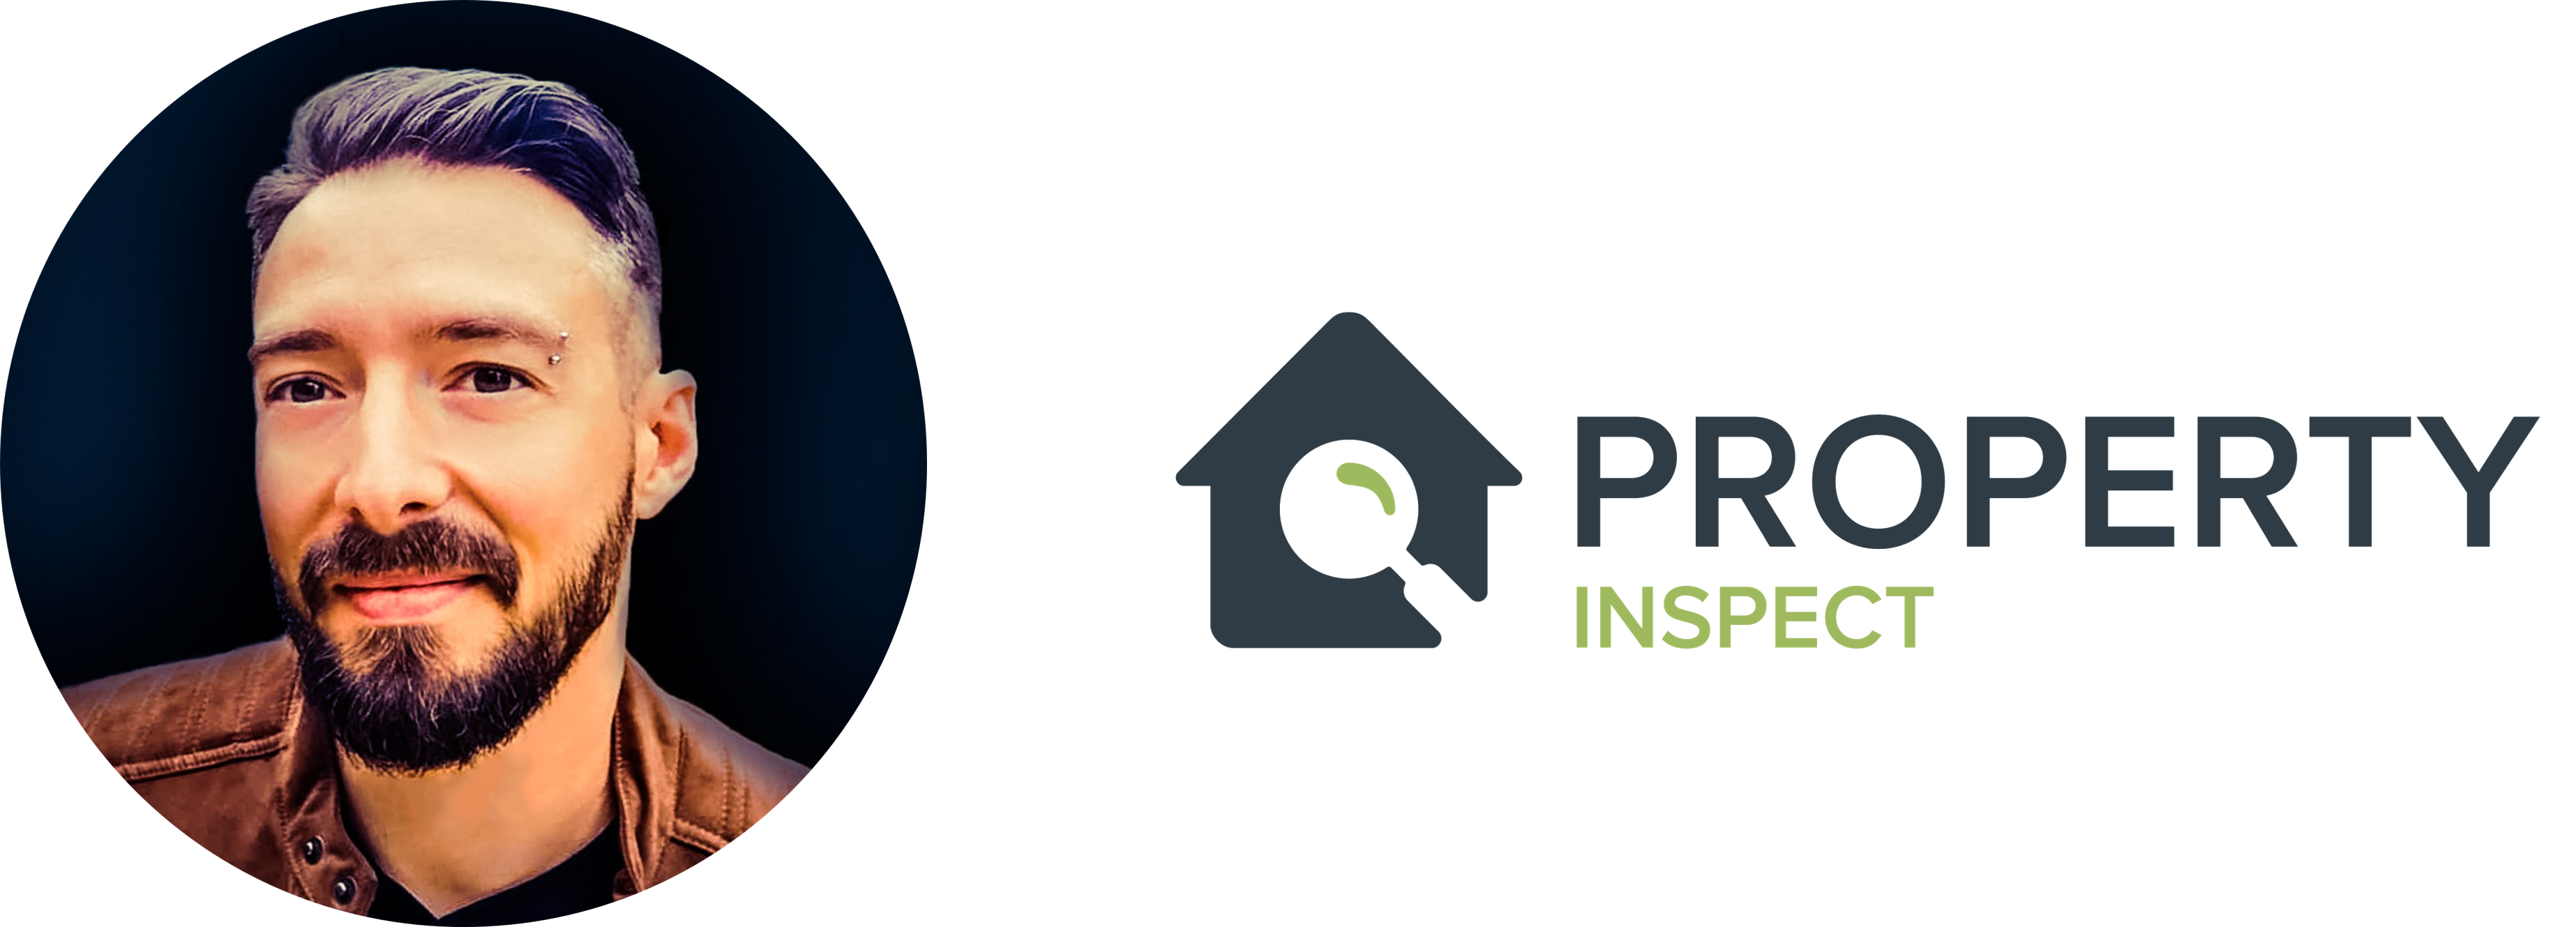 Property Inspect launches in Europe through Polish Agency for Enterprise Development (PARP), to drive digital transformation in real estate